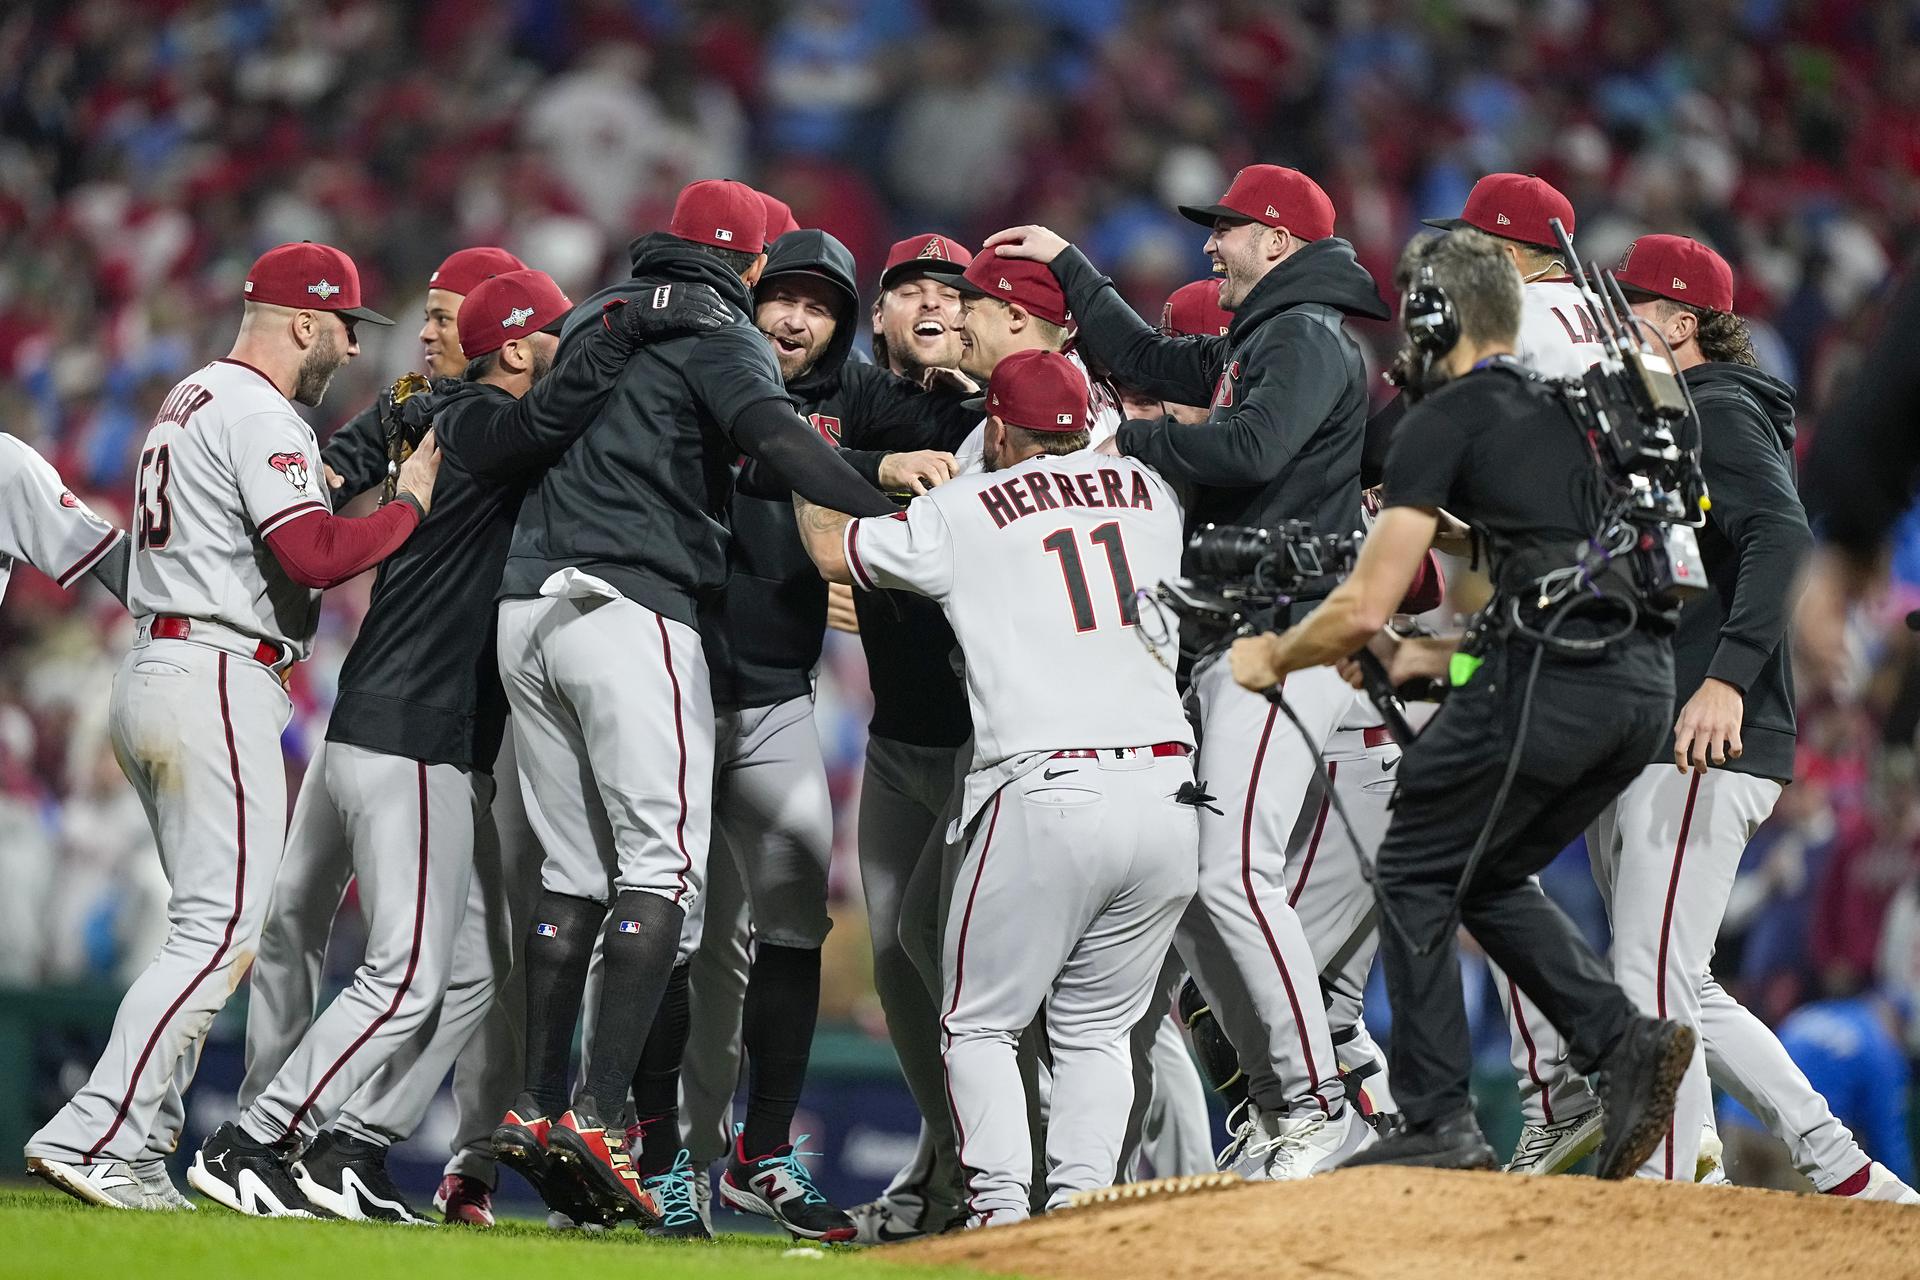 D-backs celebrate after clinching the NLCS